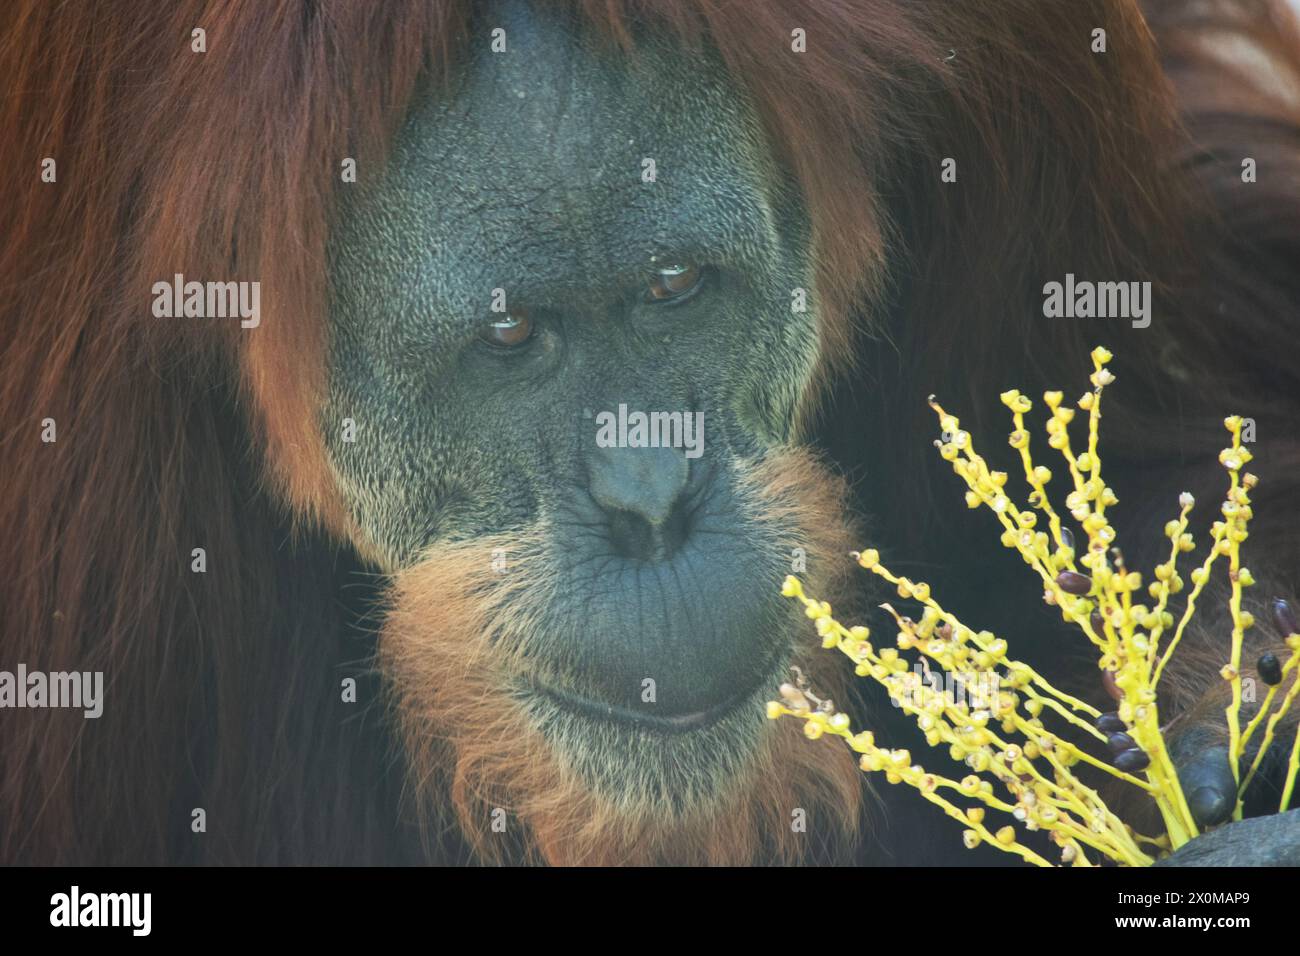 Orangutans are the largest arboreal mammal, spending most of their time in trees. Long, powerful arms and grasping hands and feet allow them to move t Stock Photo